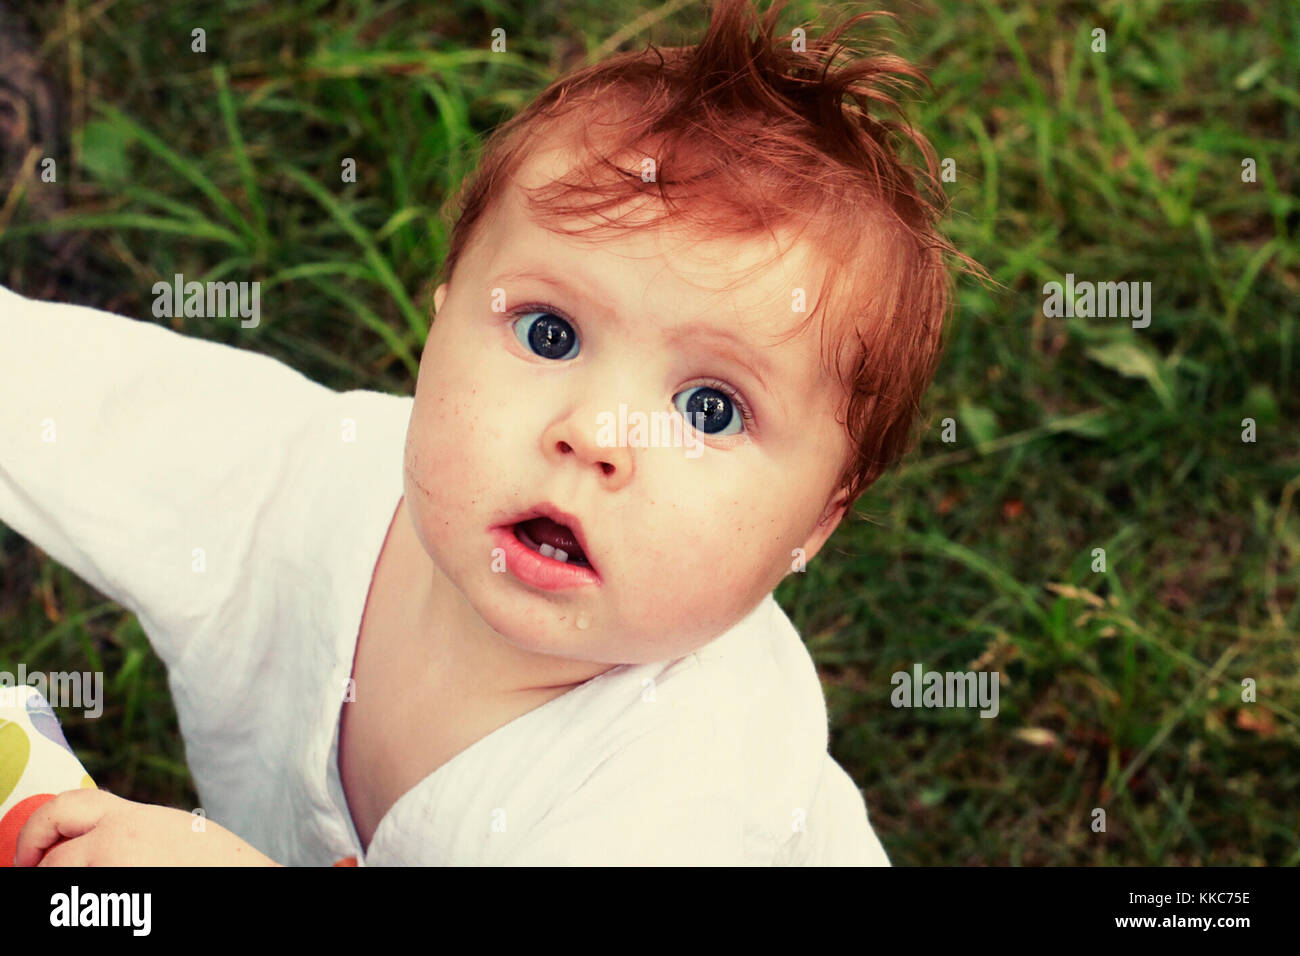 Portrait of surprised red headed baby with big blue eyes and opened mouth dressed in white shirt, looking up on natural green background with grass. Stock Photo